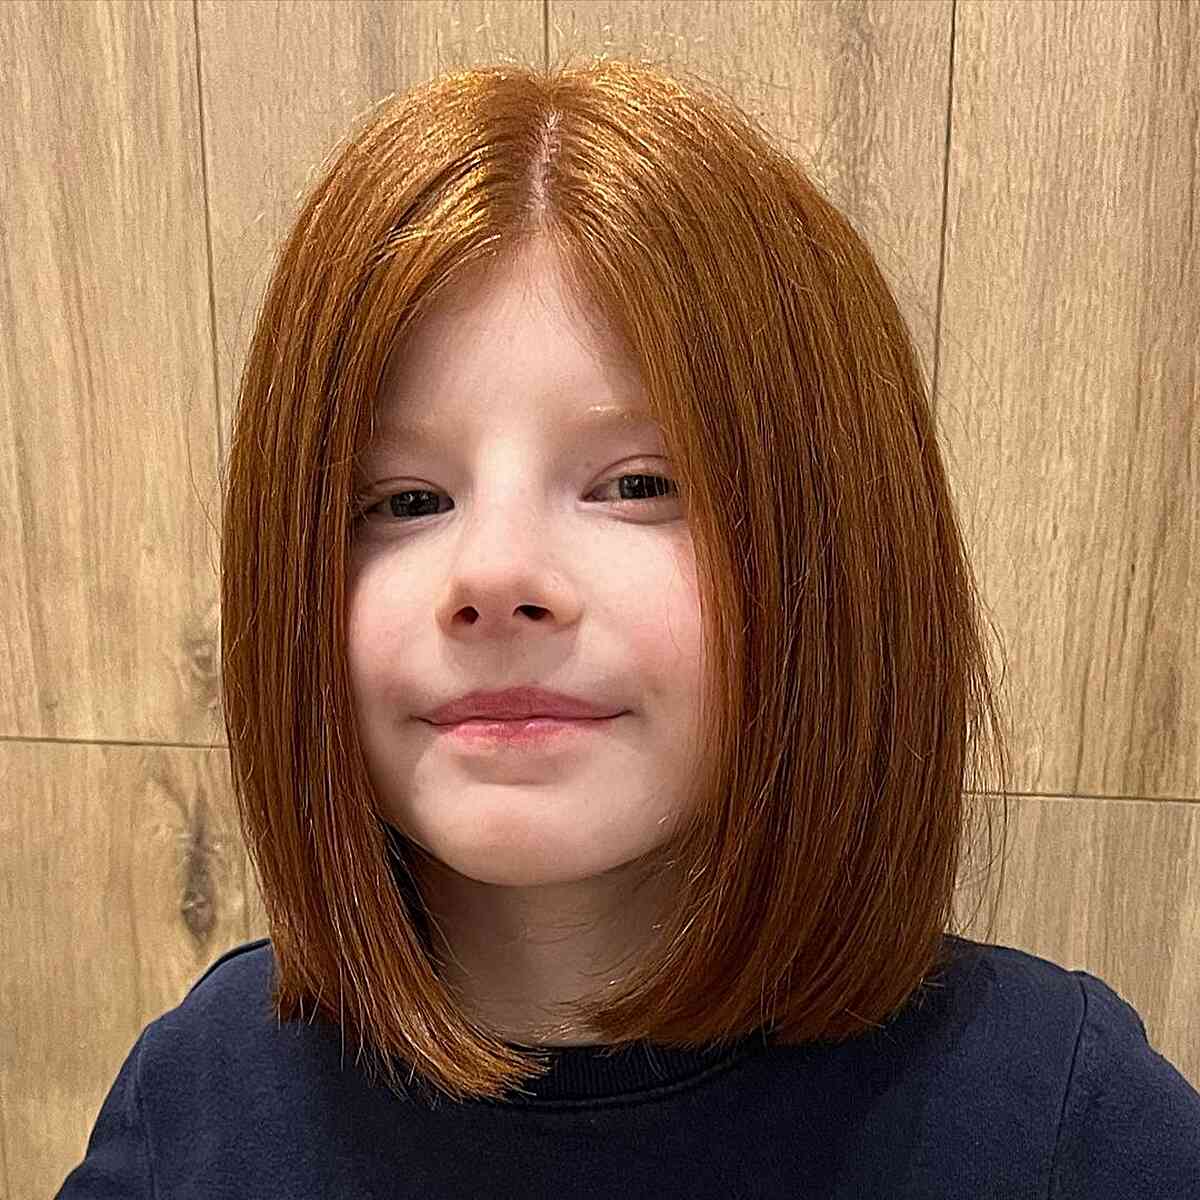 The Cutest Bob Cut with a Middle Part for Little Ladies